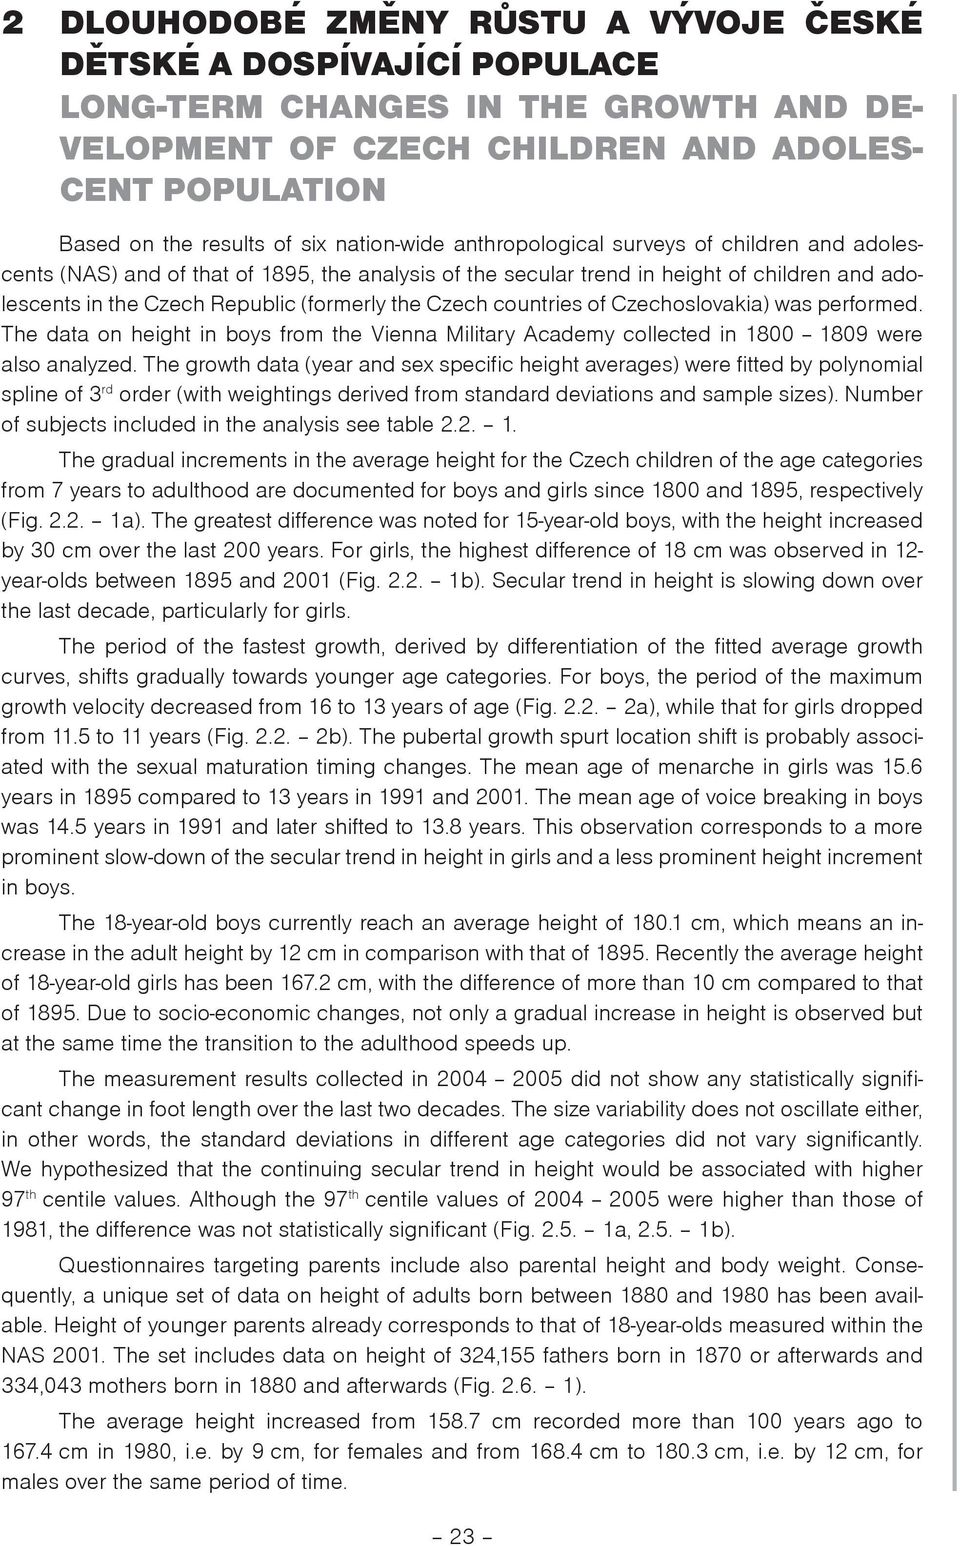 Czech countries of Czechoslovakia) was performed. The data on height in boys from the Vienna Military Academy collected in 1800 1809 were also analyzed.